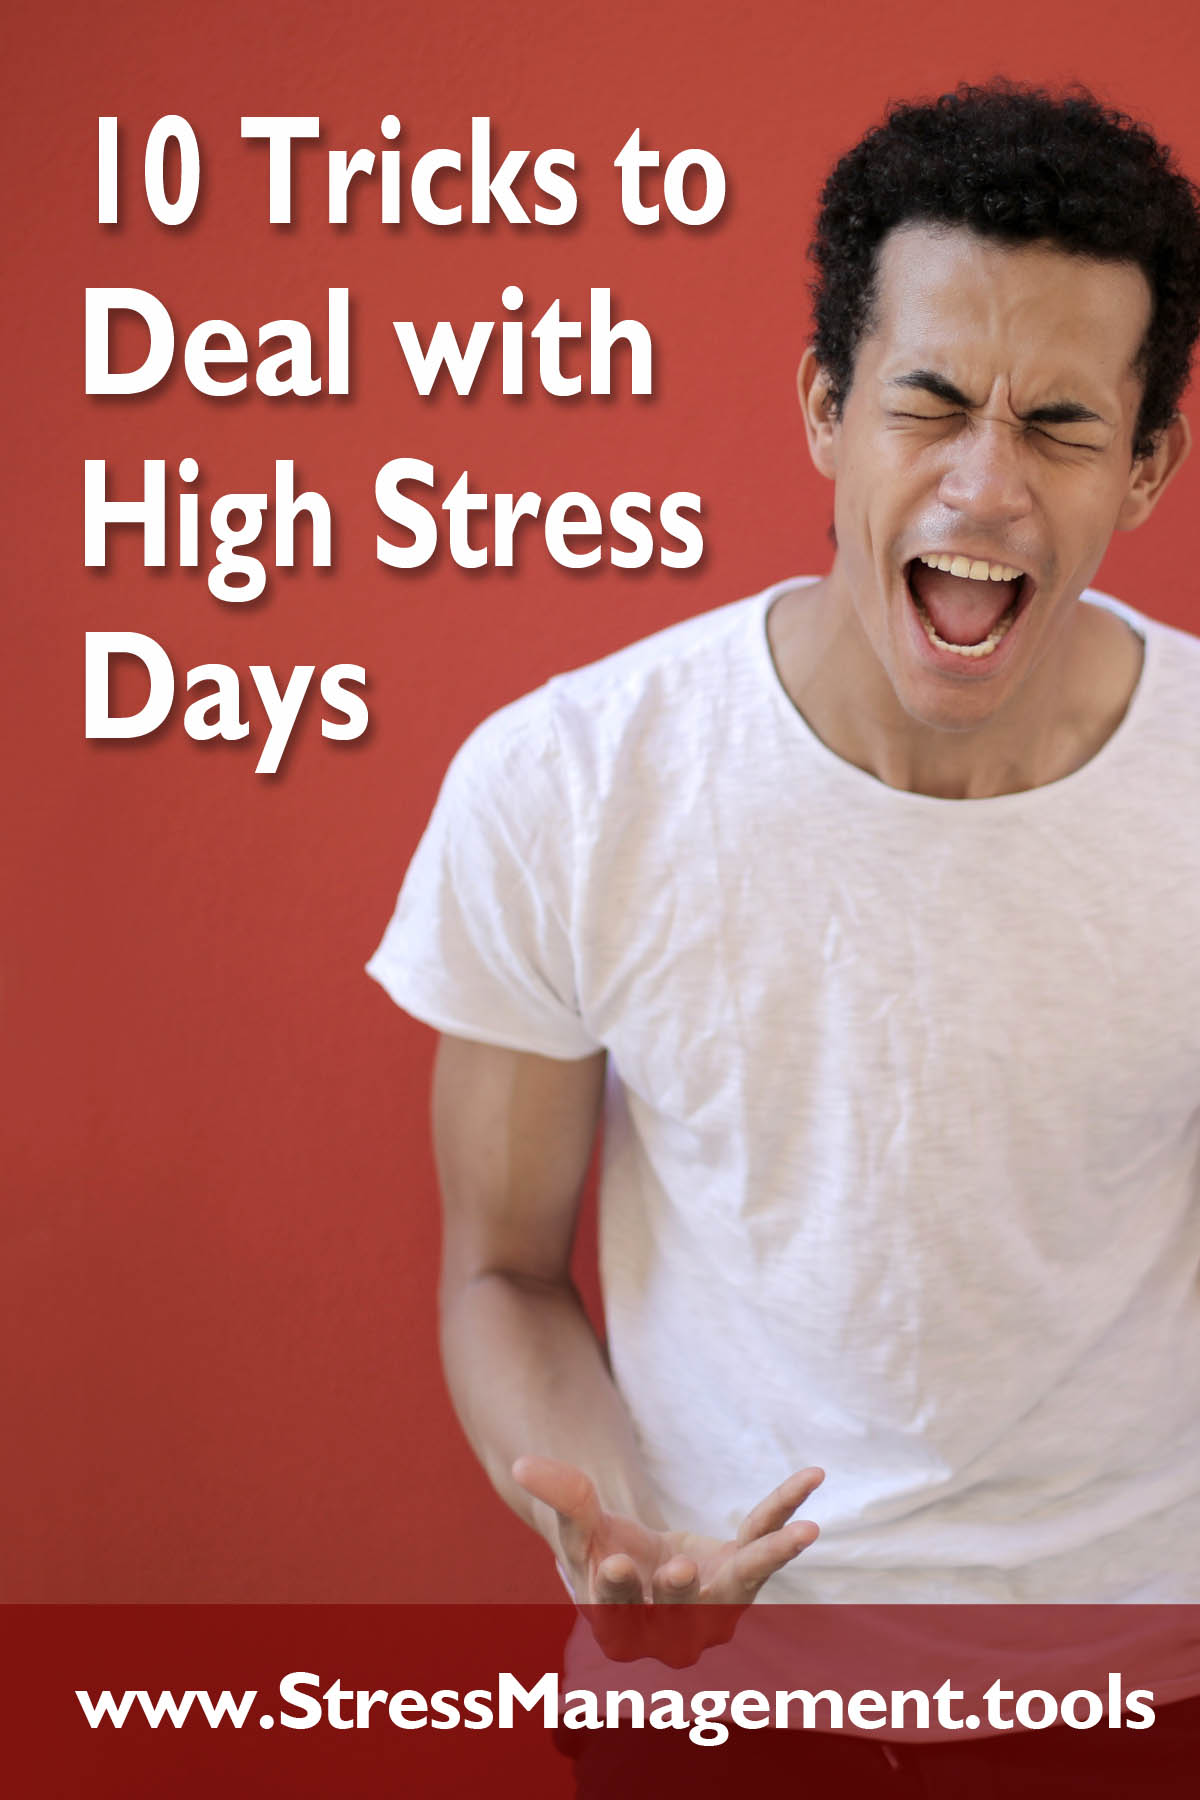 10 Tricks to Deal with High Stress Days